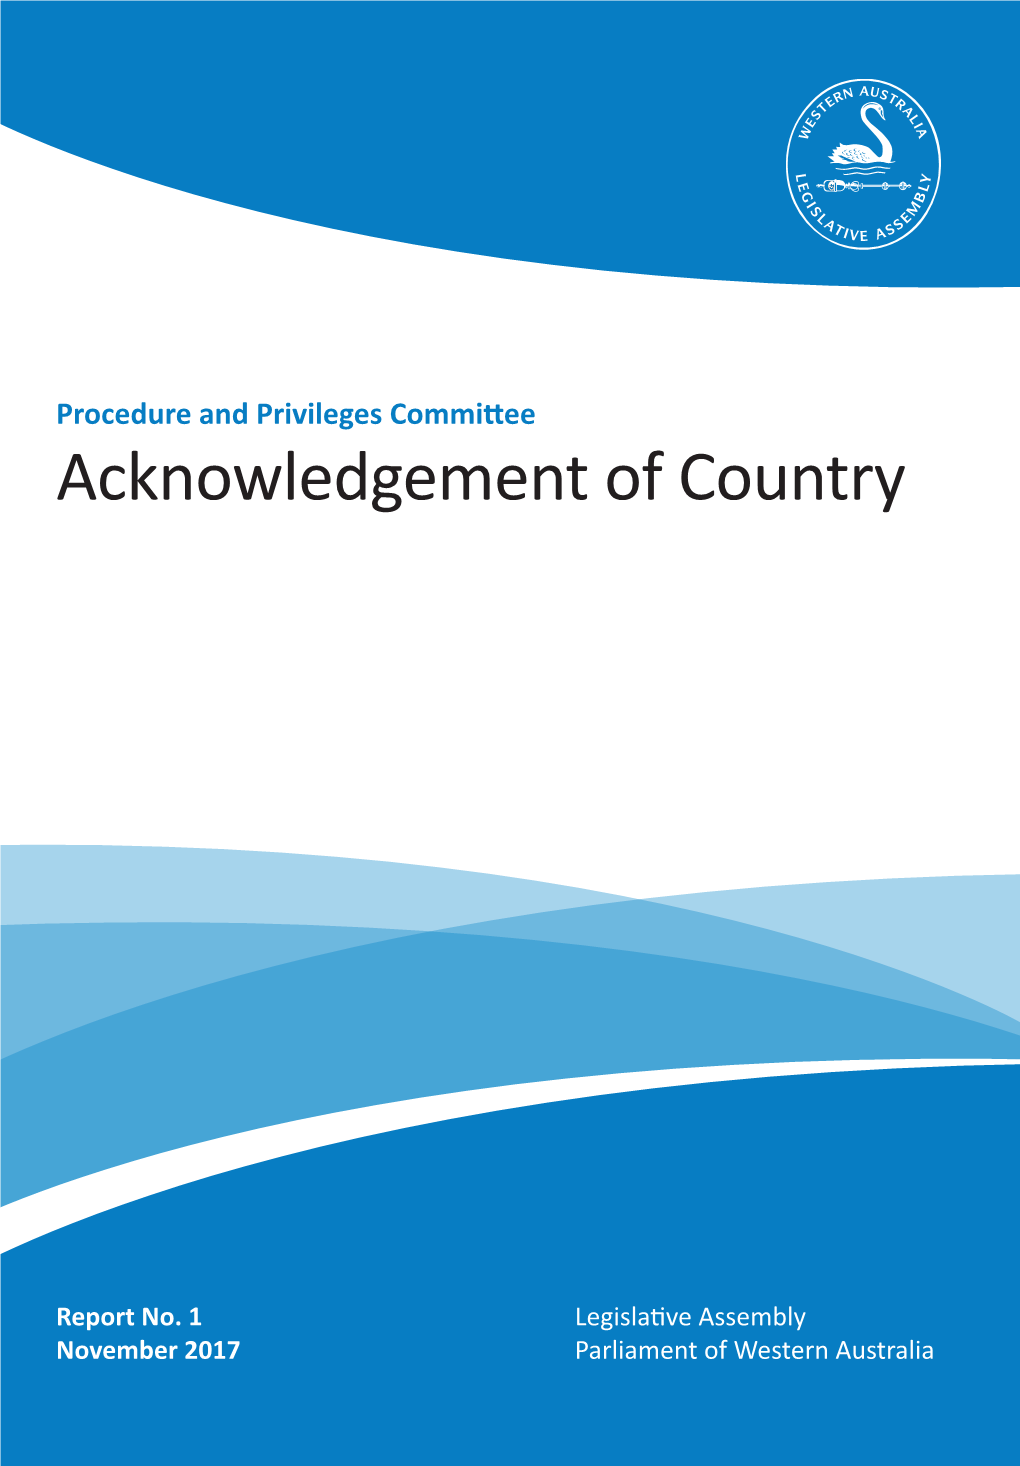 Report No. 1: Acknowledgement of Country